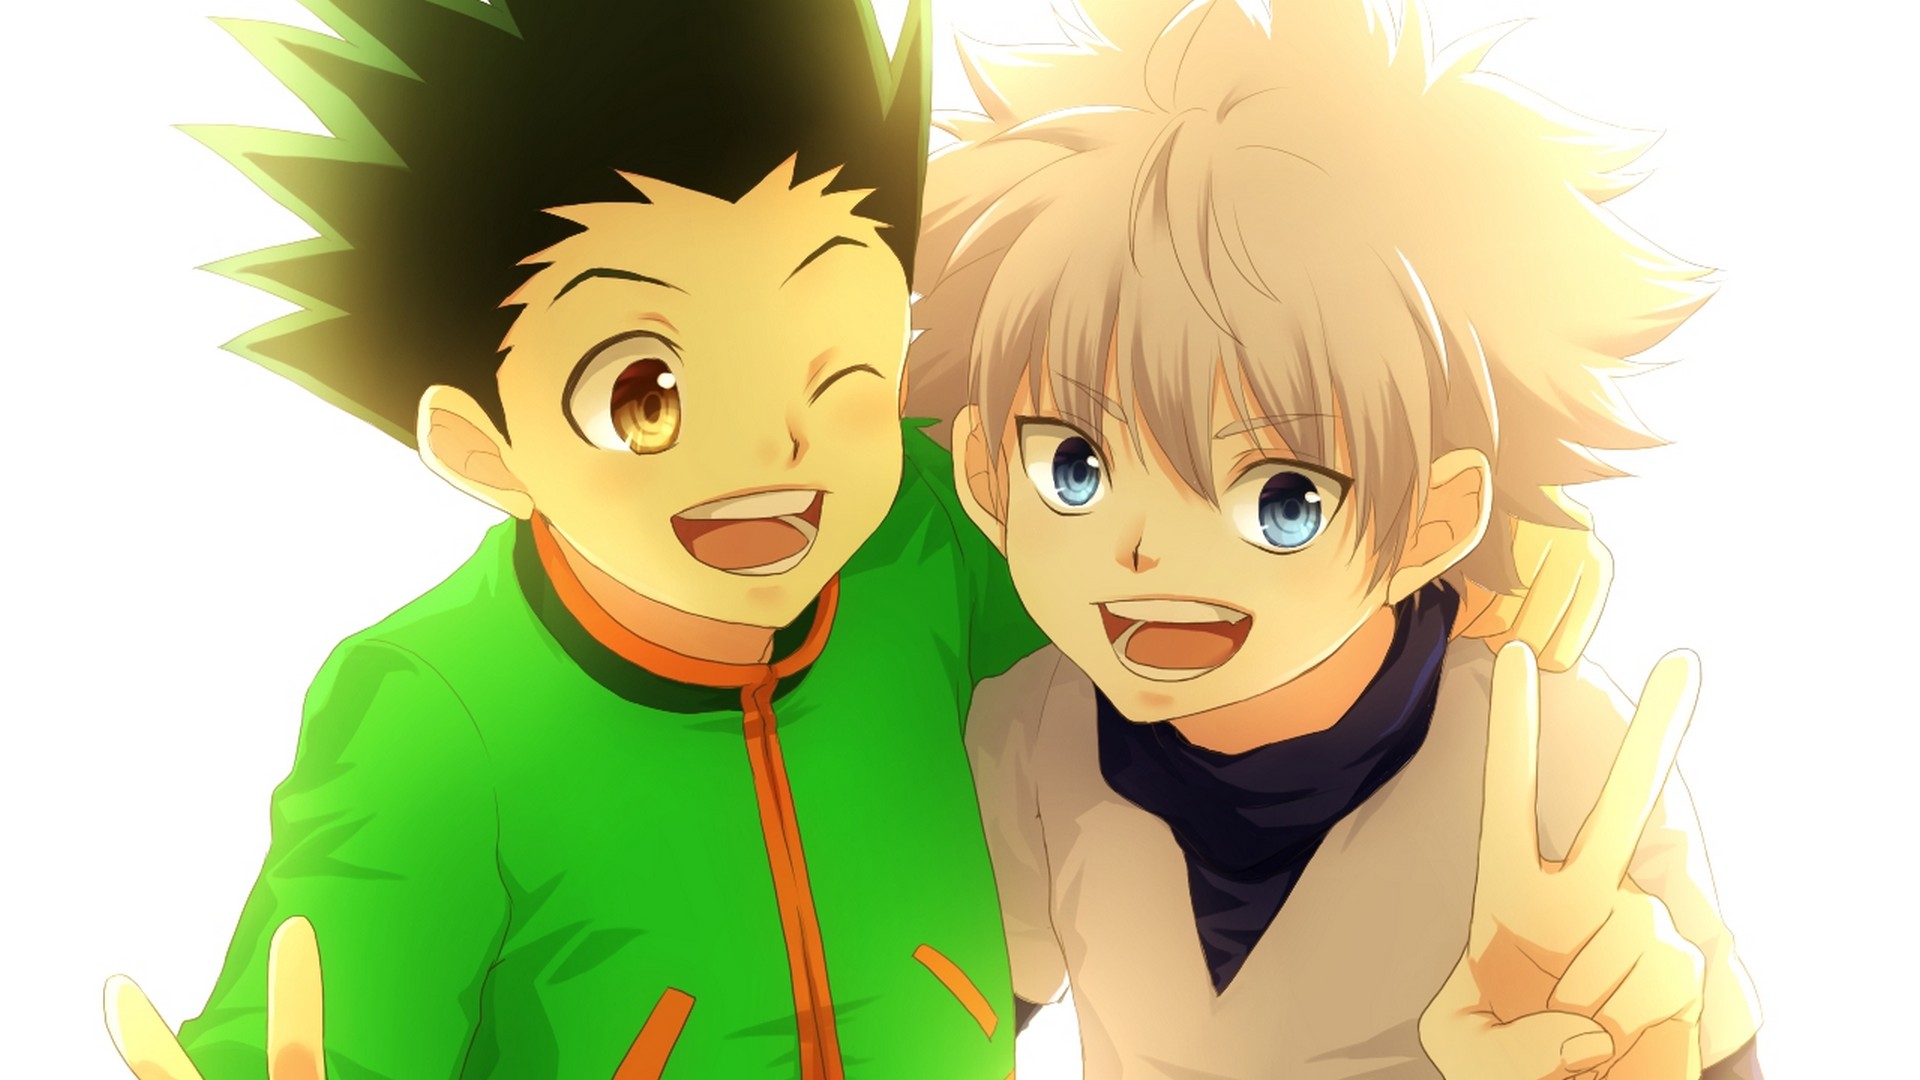 Gon And Killua Wallpaper HD with high-resolution 1920x1080 pixel. You can use this wallpaper for your Desktop Computer Backgrounds, Mac Wallpapers, Android Lock screen or iPhone Screensavers and another smartphone device